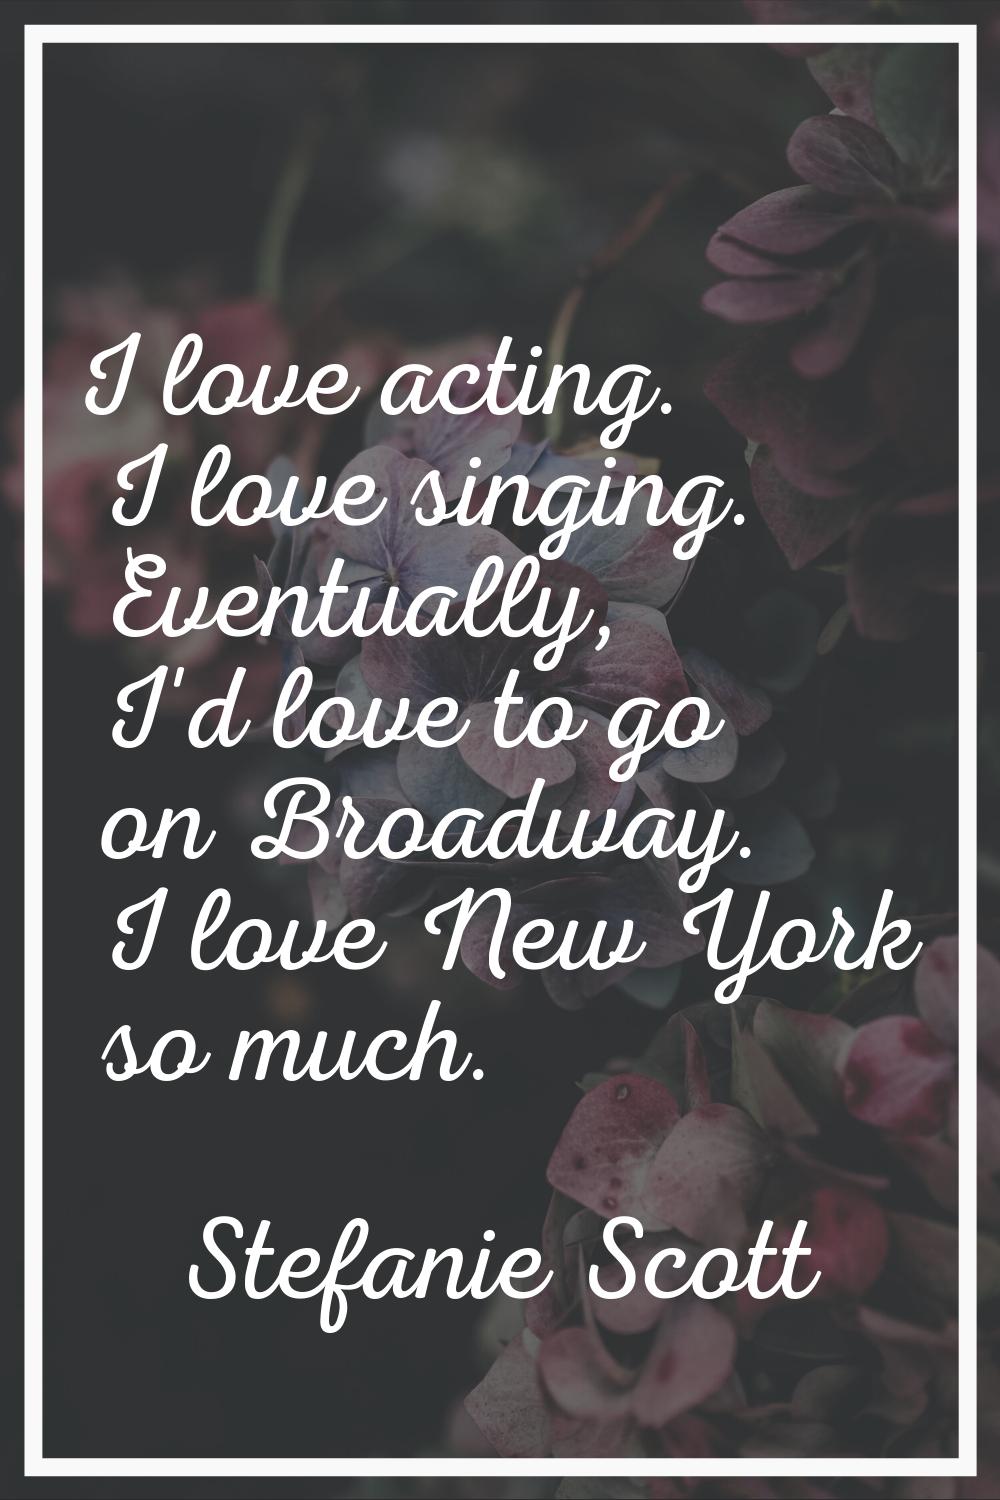 I love acting. I love singing. Eventually, I'd love to go on Broadway. I love New York so much.